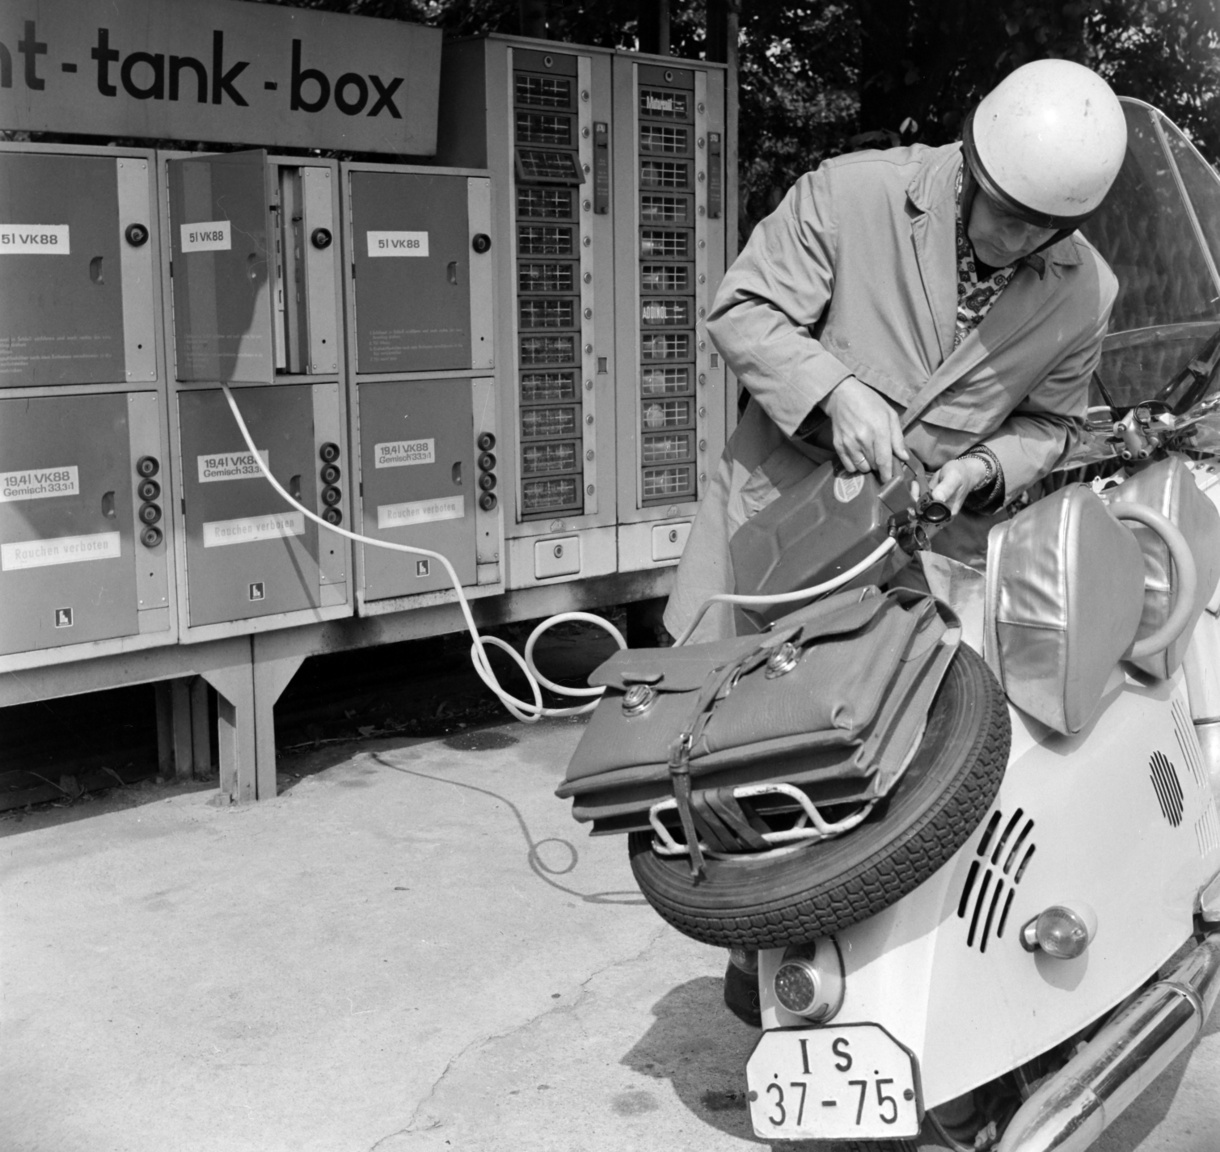 One of the brilliant inventions of the GDR was the tank-box, the self-service overnight petrol station. To use this, you had to purchase a key to a safe which enclosed a 5 litre can of gas. One key bought you five litres, two bought you ten, and so forth.